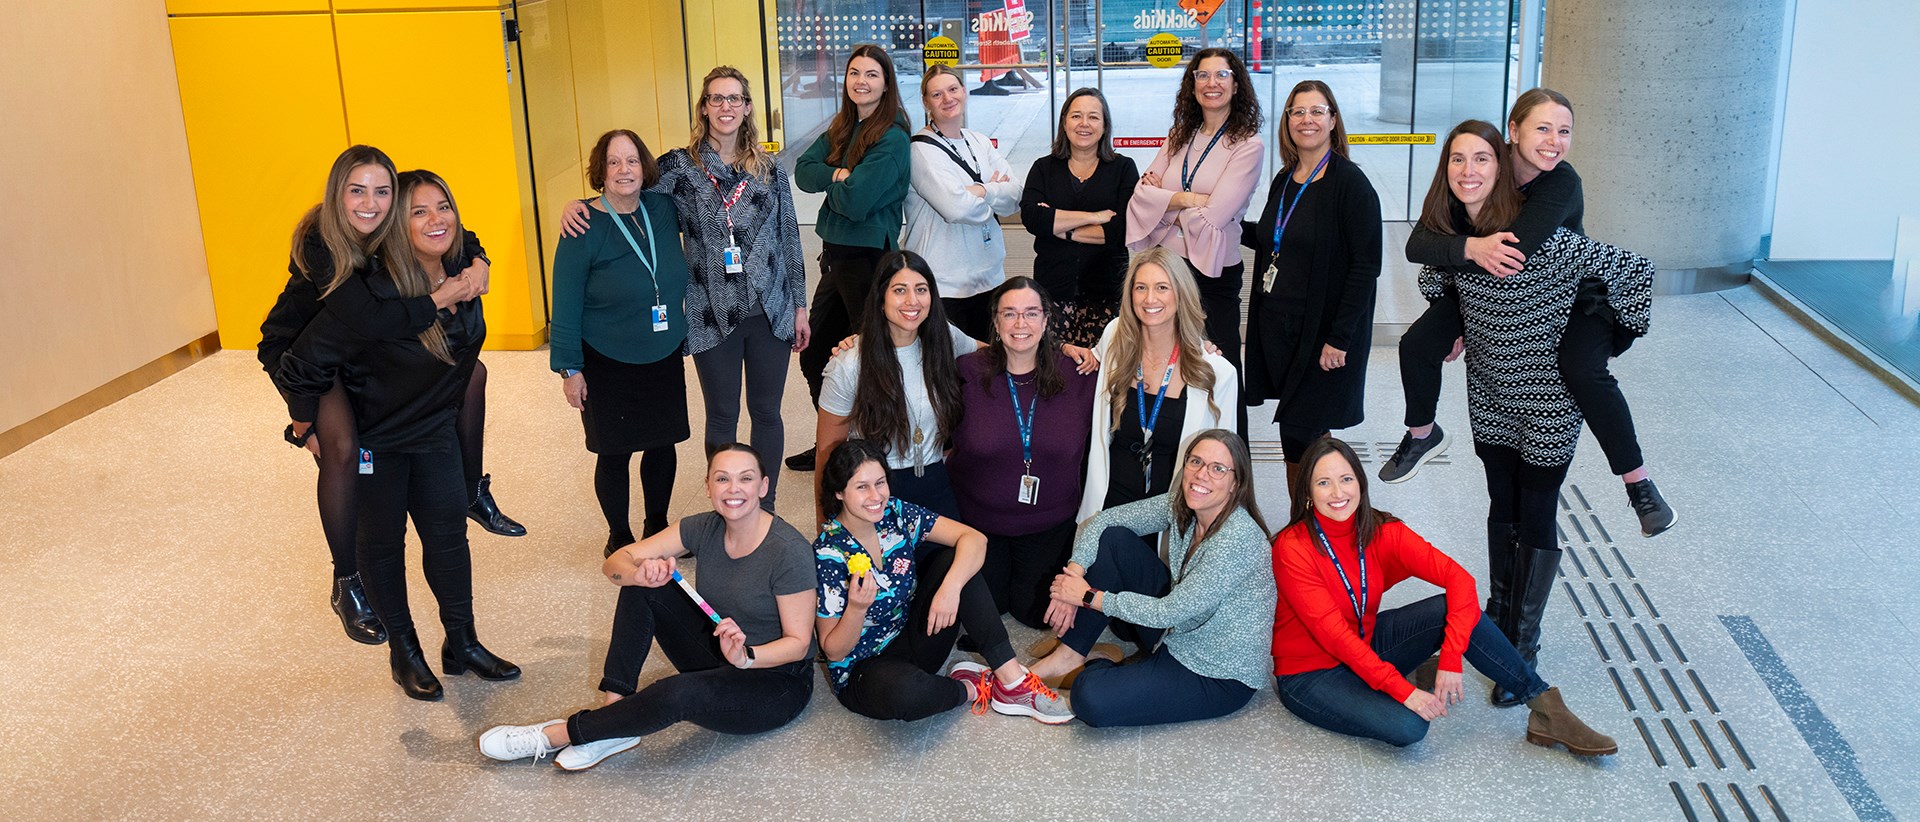 A group of 18 people smiling and posing together for a photo on the main floor of the Patient Support Centre. 